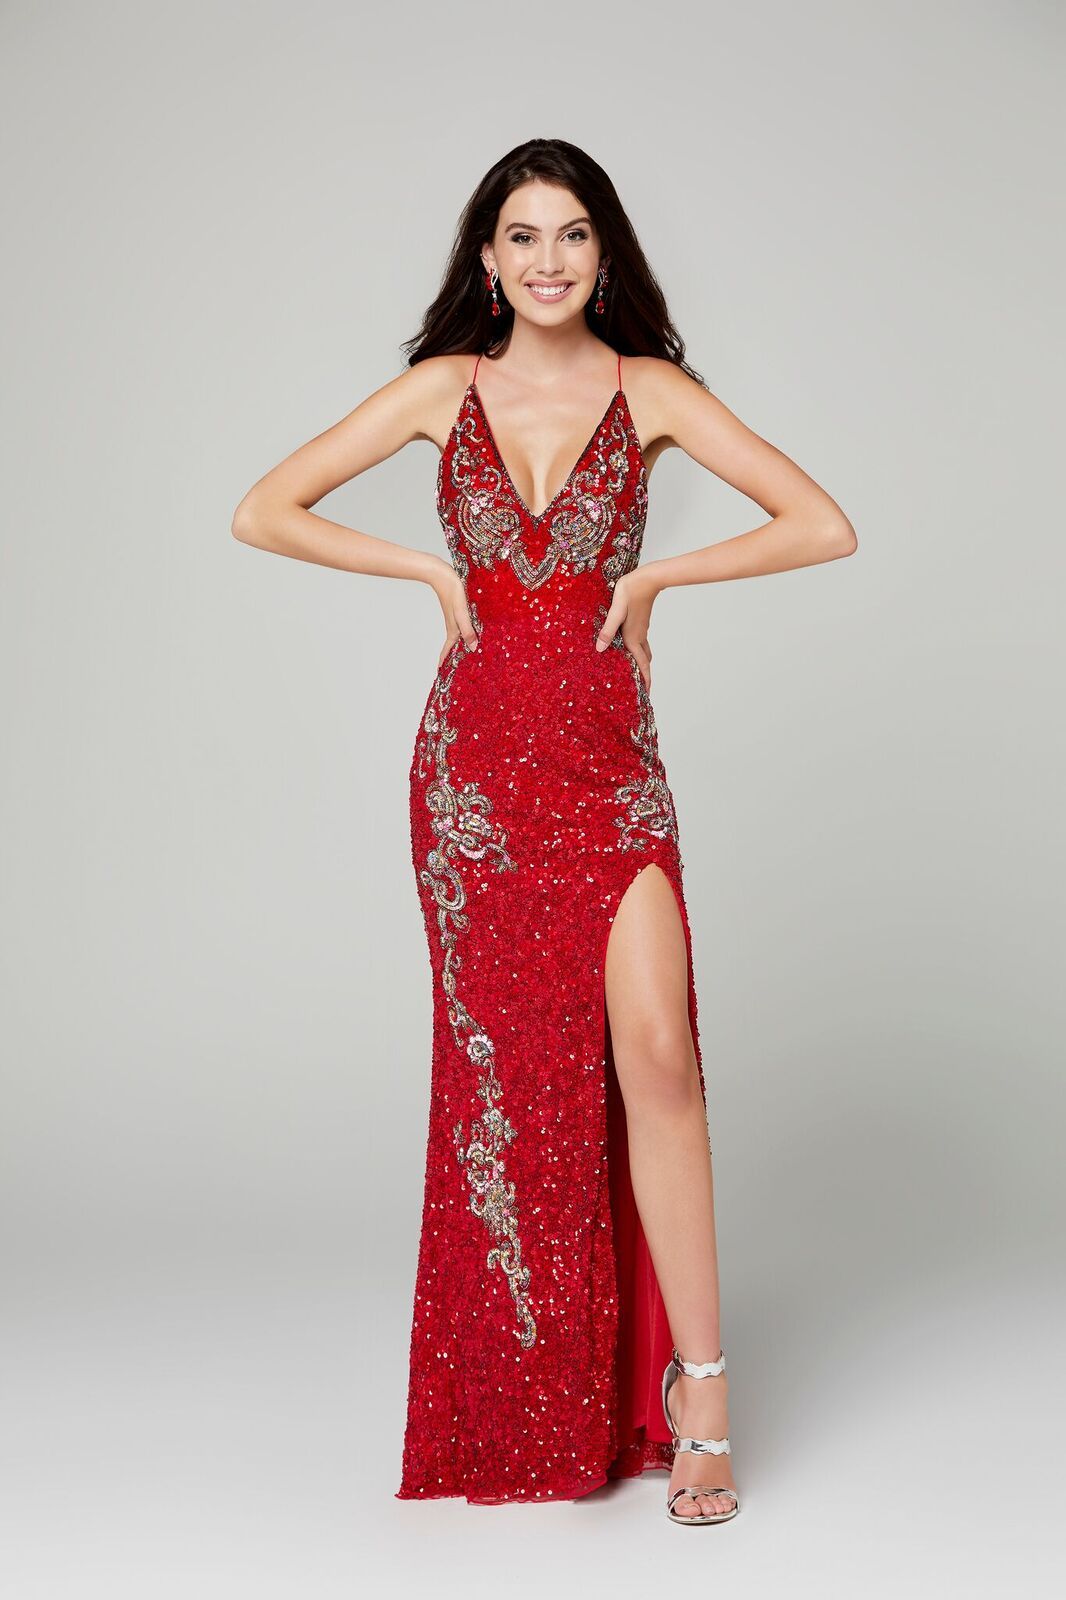 Primavera Couture 3211 is a Long sequin Embellished Evening Gown Formal Dress  Available Colors: Midnight Multi,  Platinum Multi, Red, Black, Charcoal, Ivory   Fully beaded prom dress with floral pattern and side slit. Long Sequin Gown featuring a v neckline. slit in the fitted skirt.